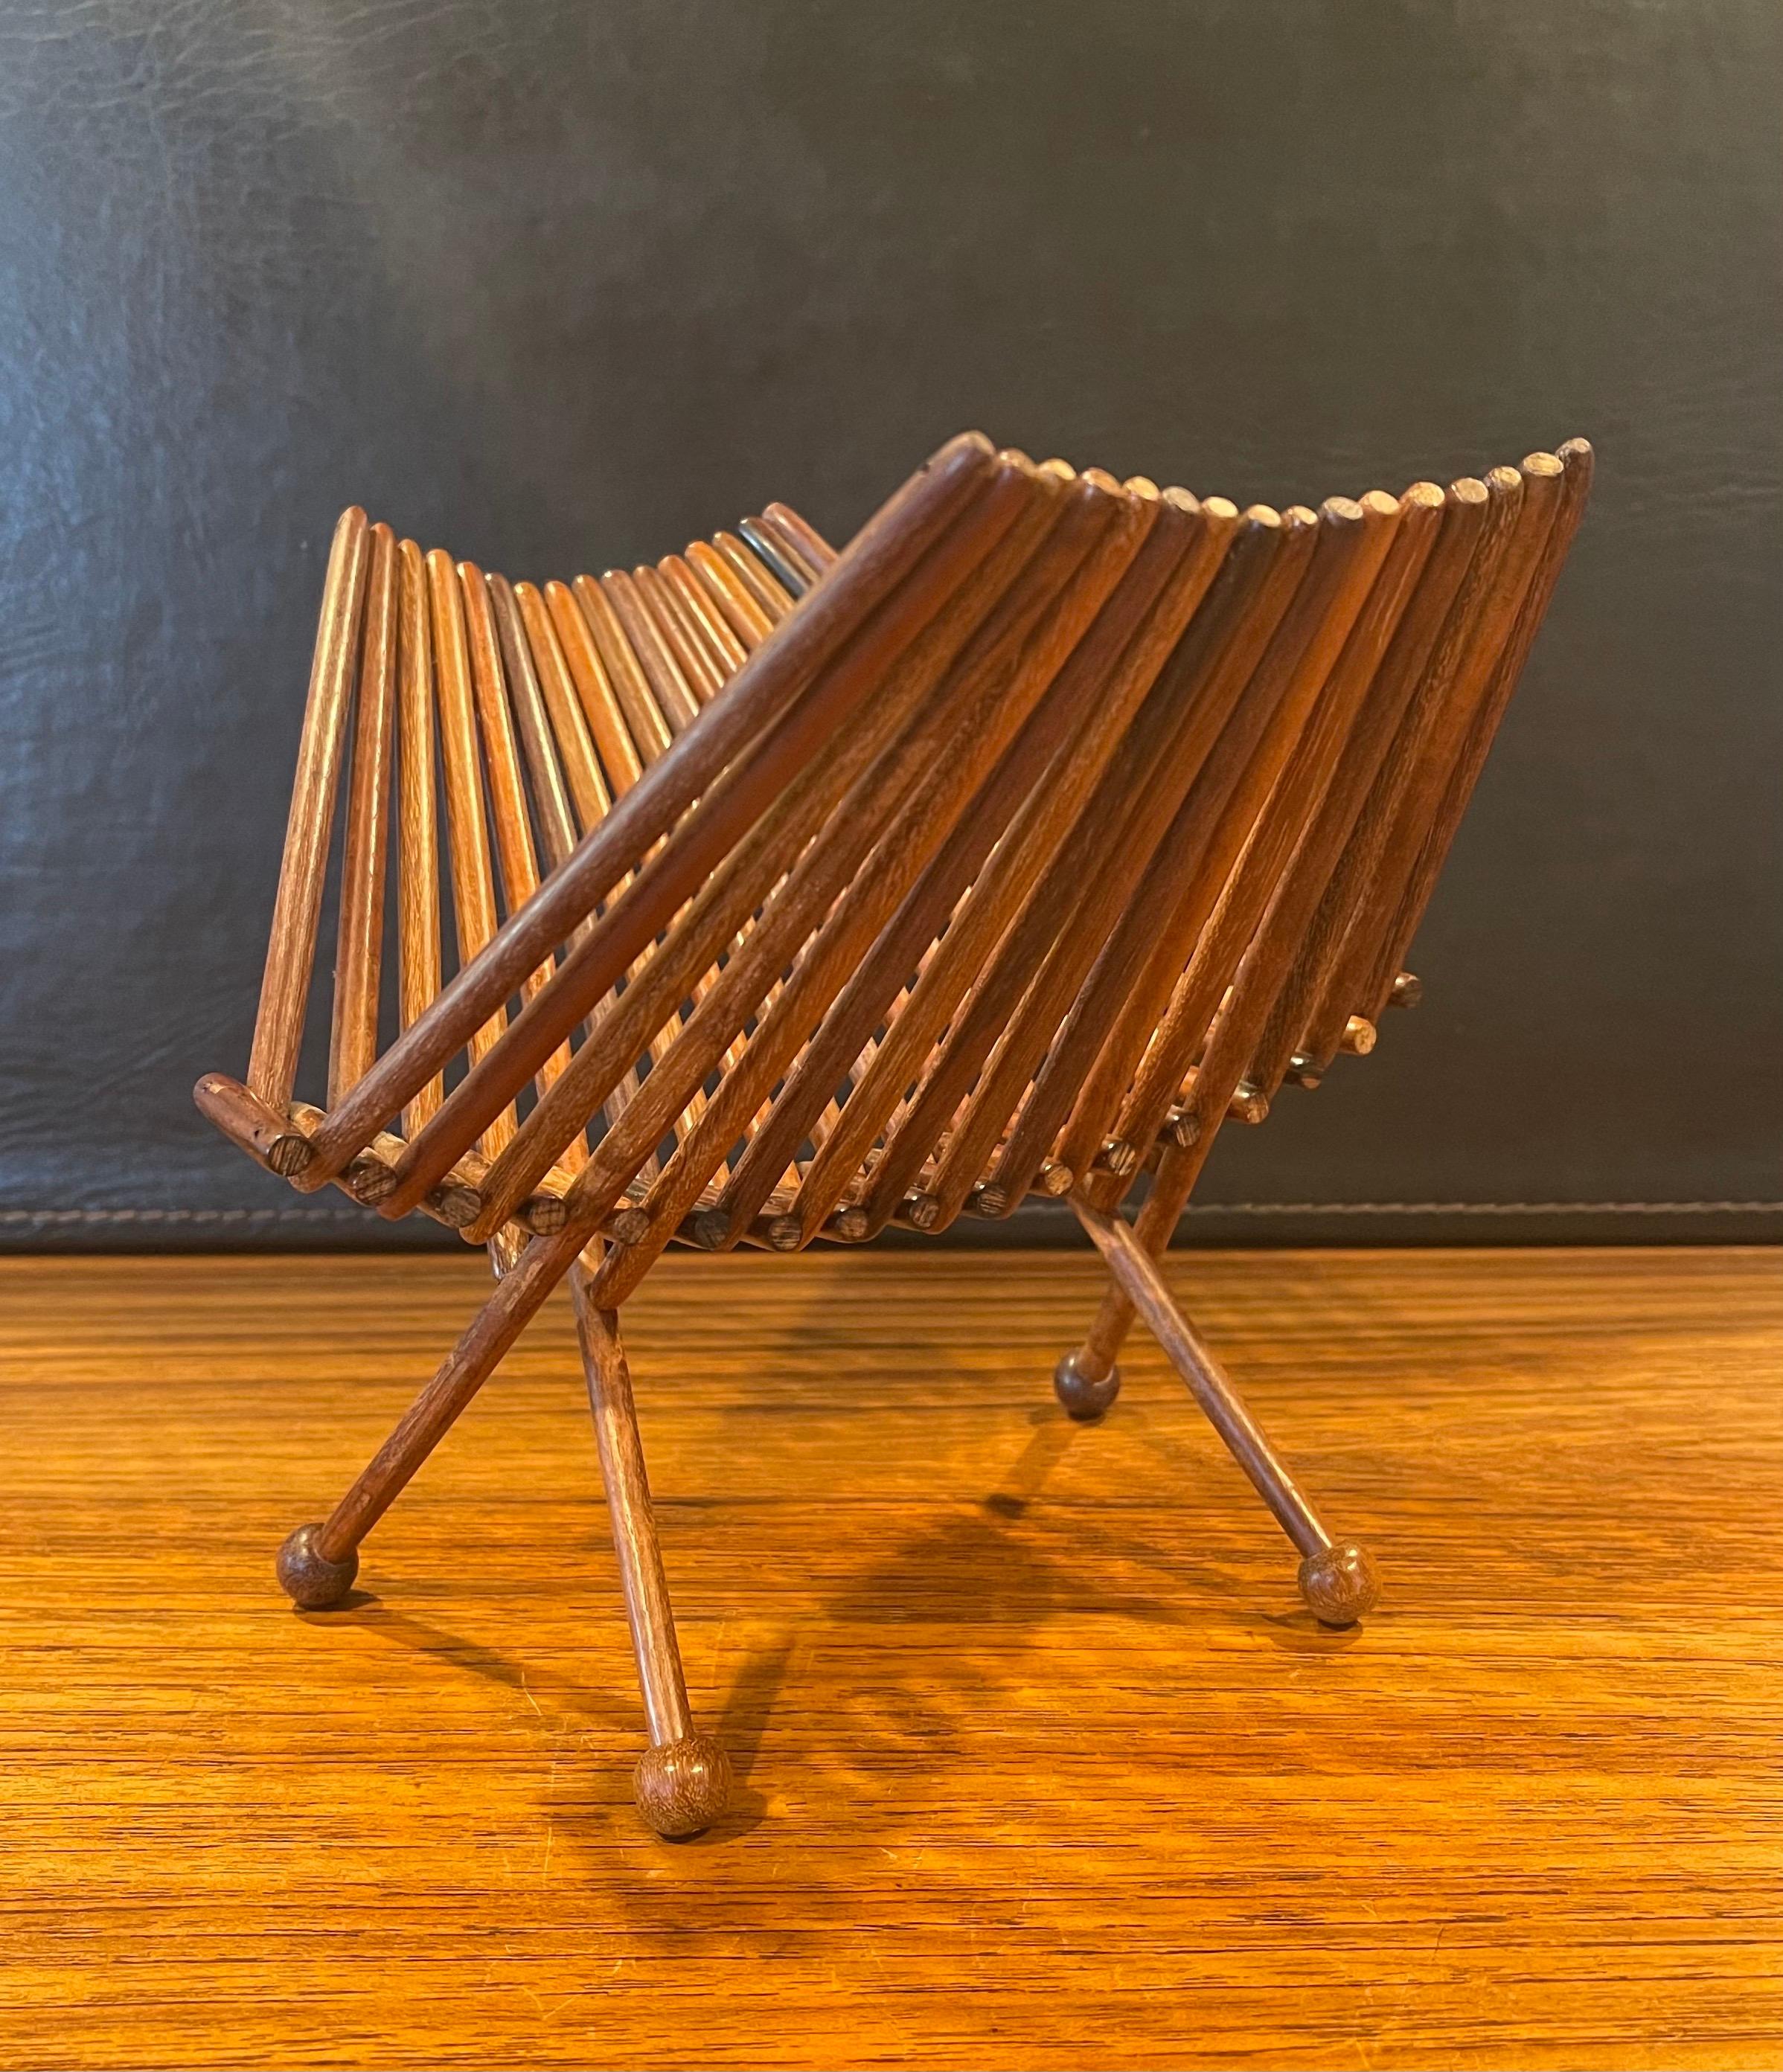 A very cool and unique Danish modern rosewood spindle napkin holder, circa 1960s. The piece is in very good vintage condition and measures 7.5